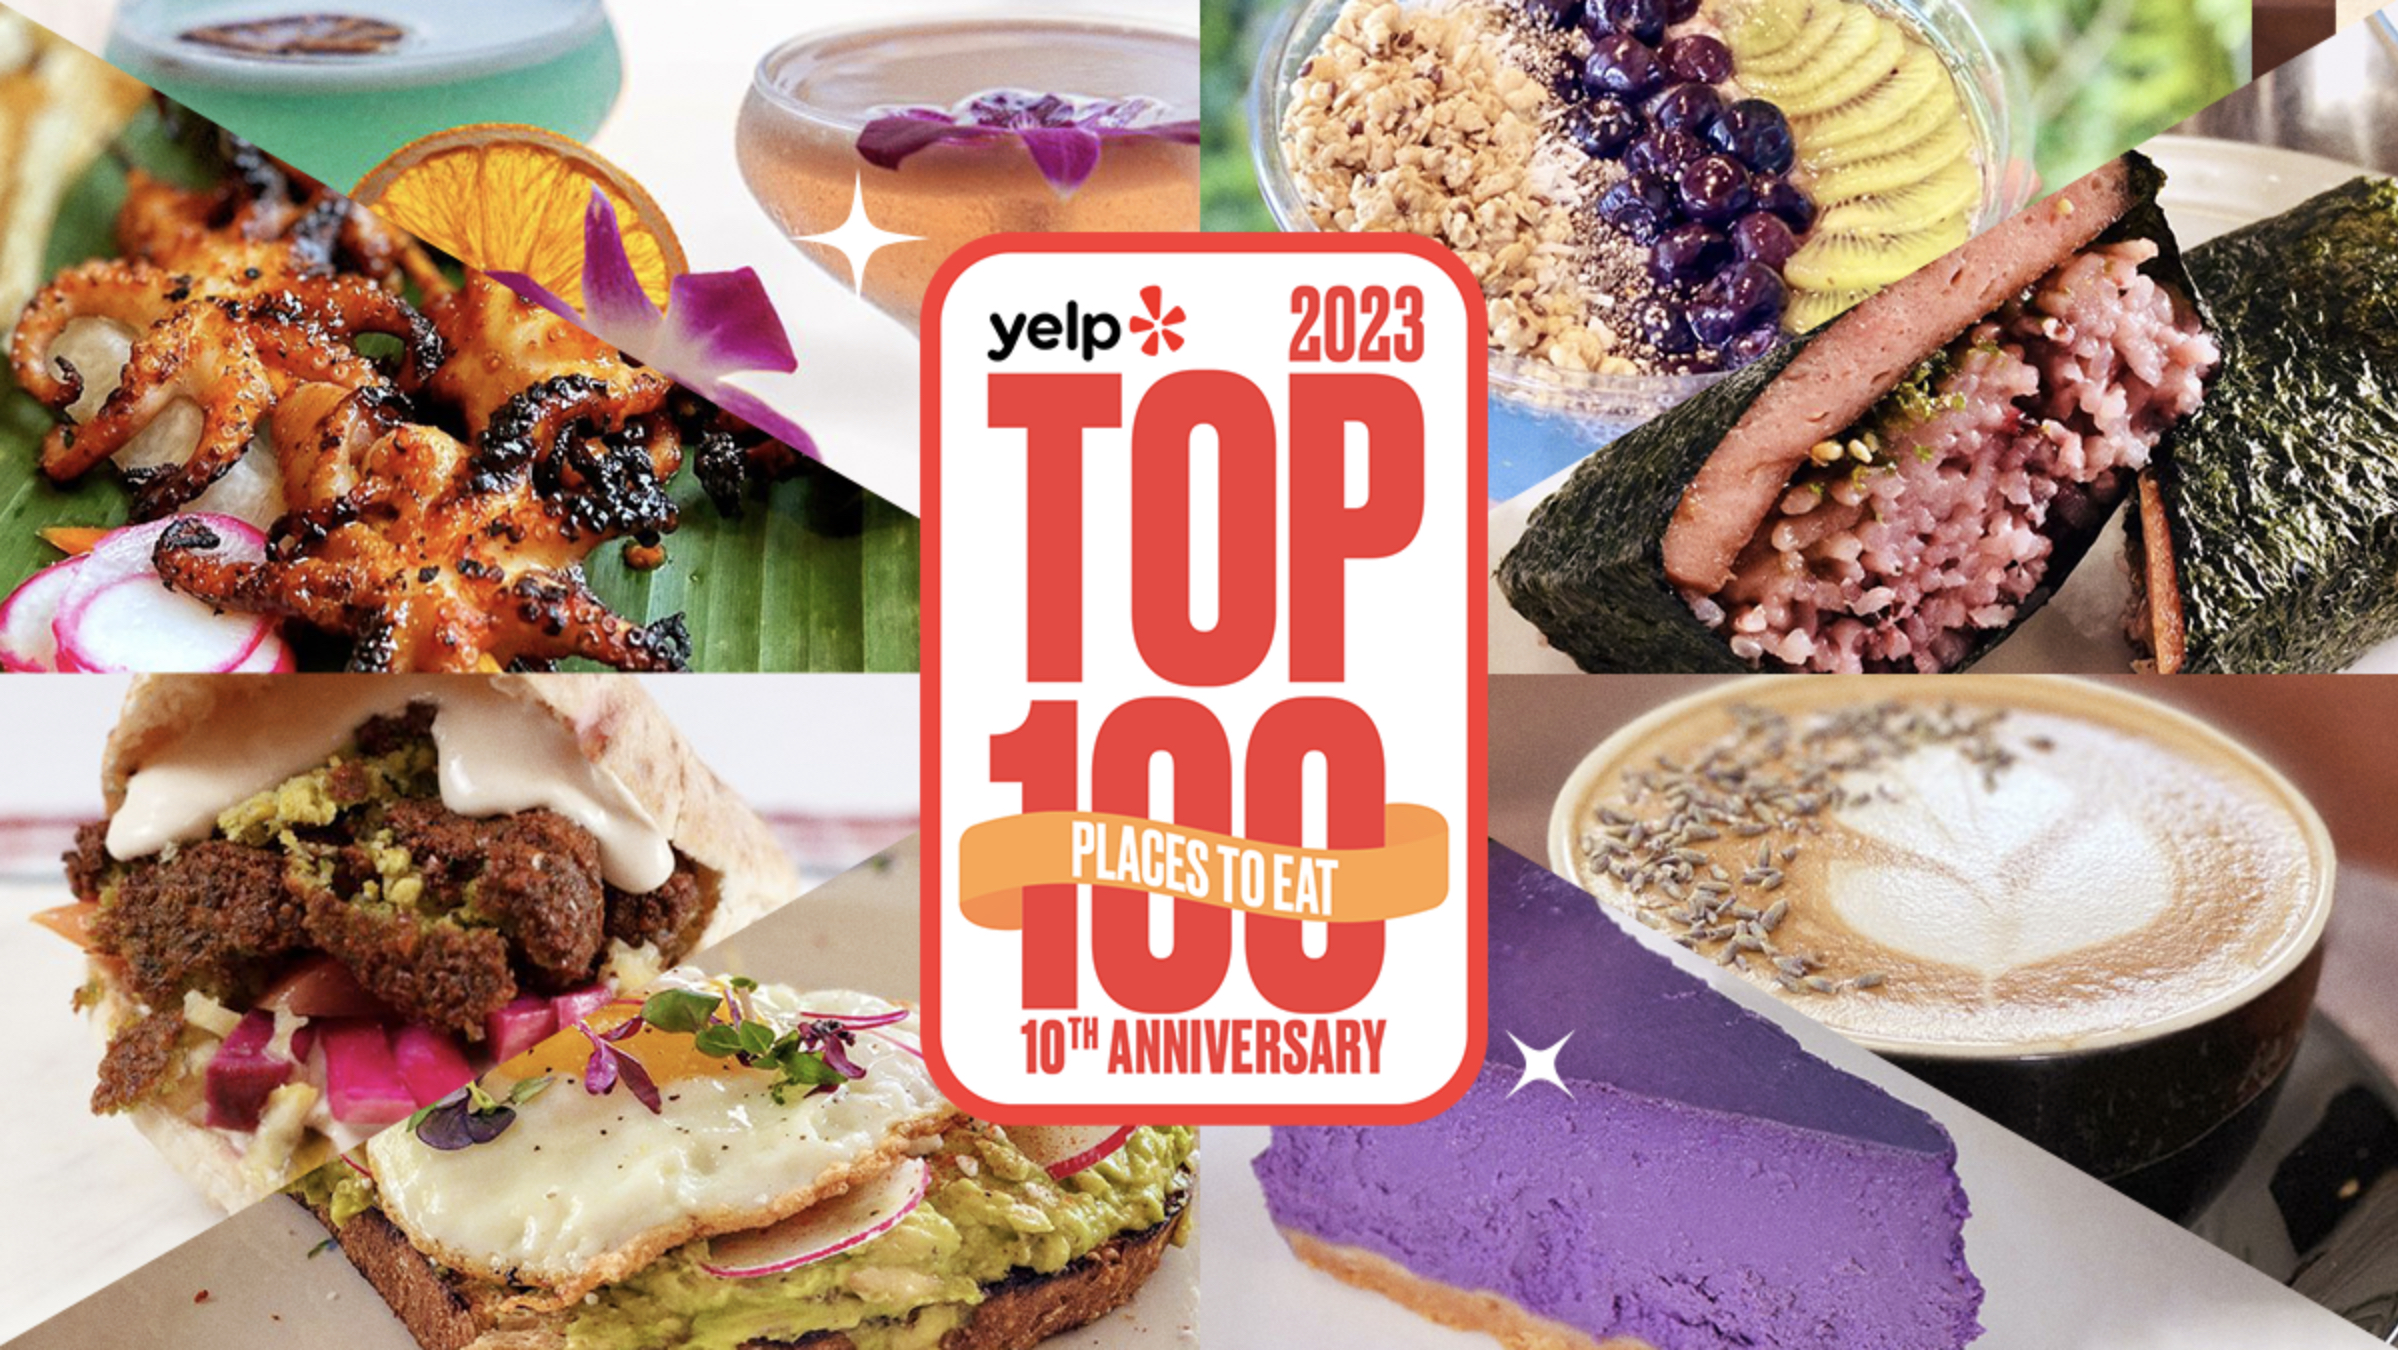 This was the 10th anniversary of Yelp's Top 100 Restaurants.  (Yelping)